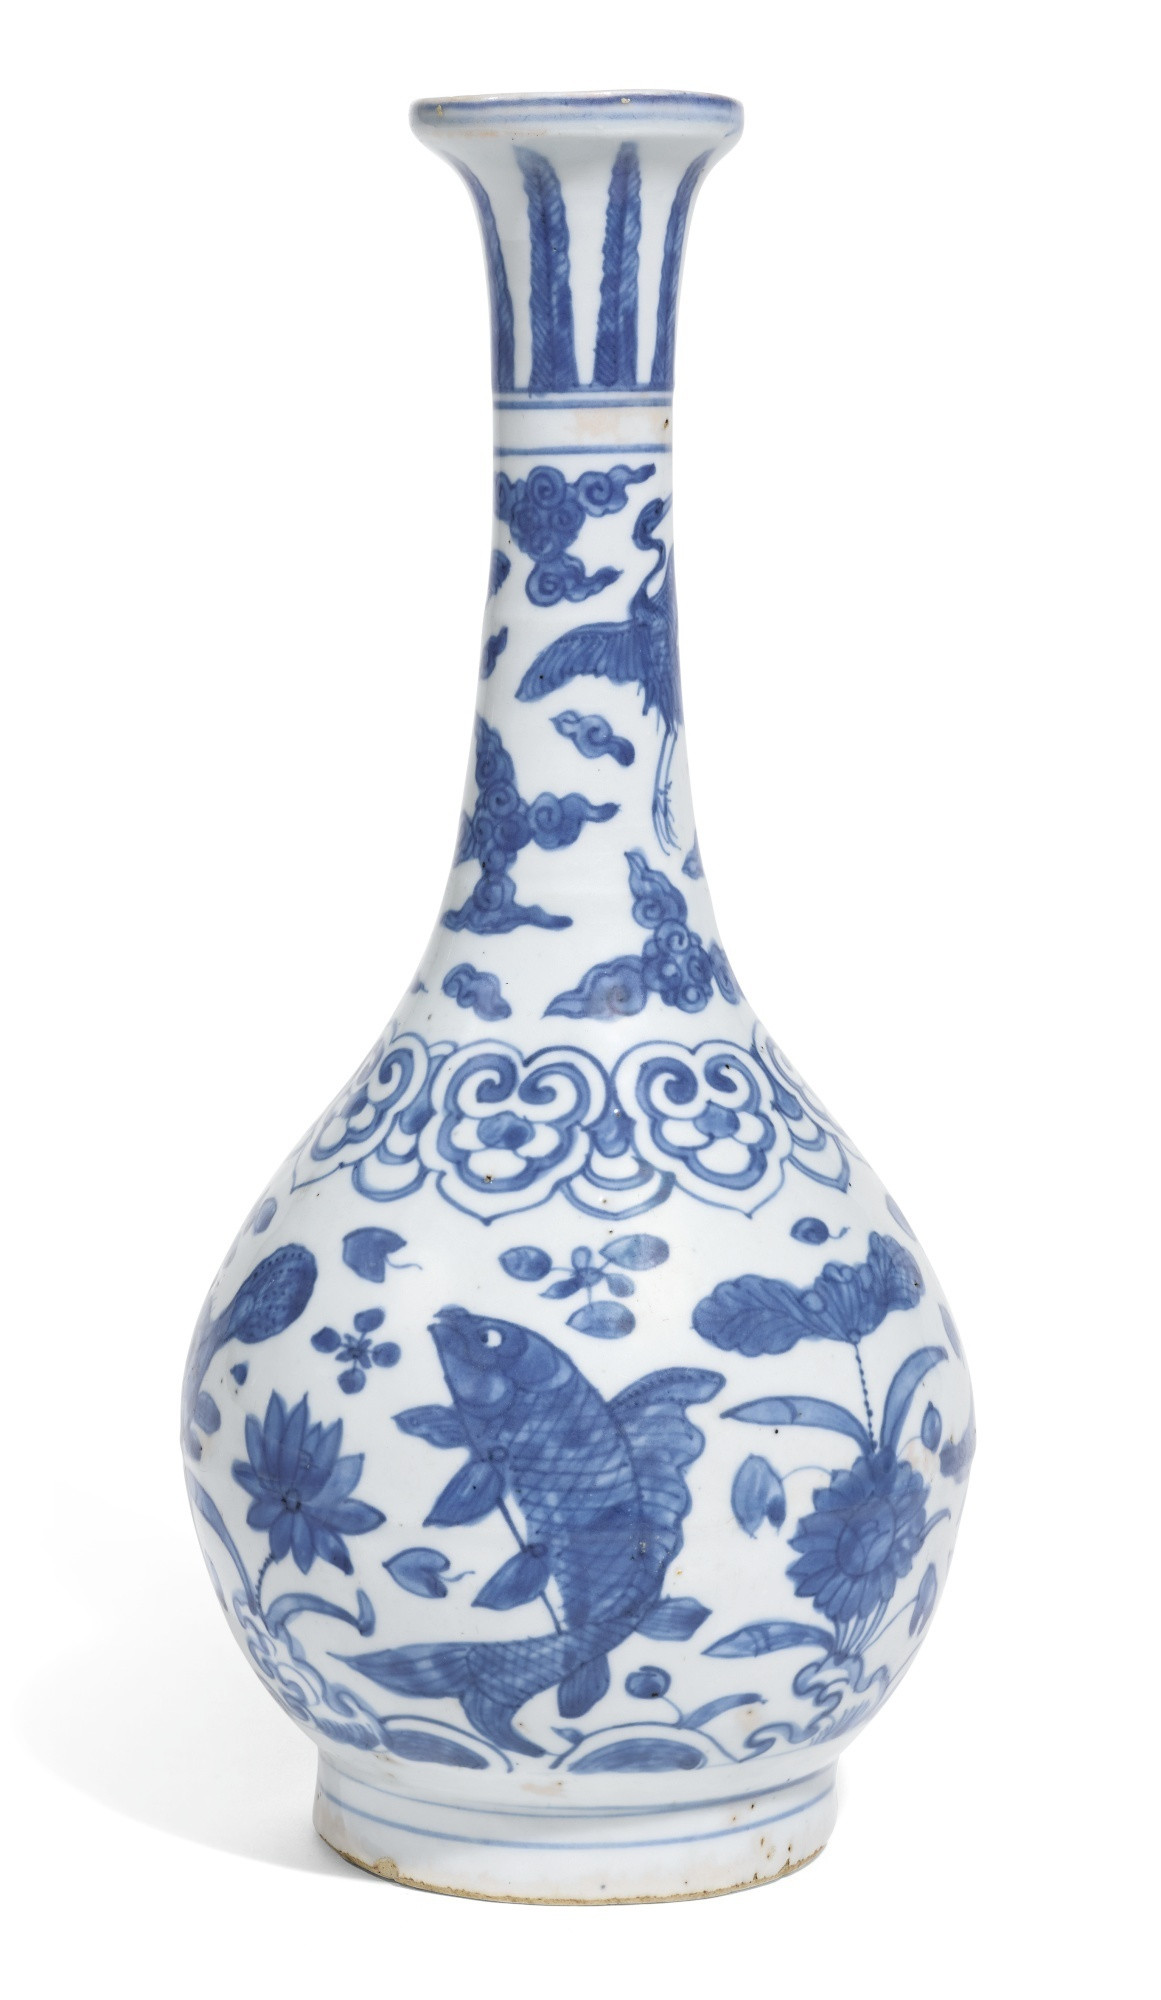 20 Stylish Long Neck Vase 2022 free download long neck vase of an unusual blue and white ming vase yuhuchun ping with fish pertaining to an unusual blue and white ming vase yuhuchun ping with fish decoration